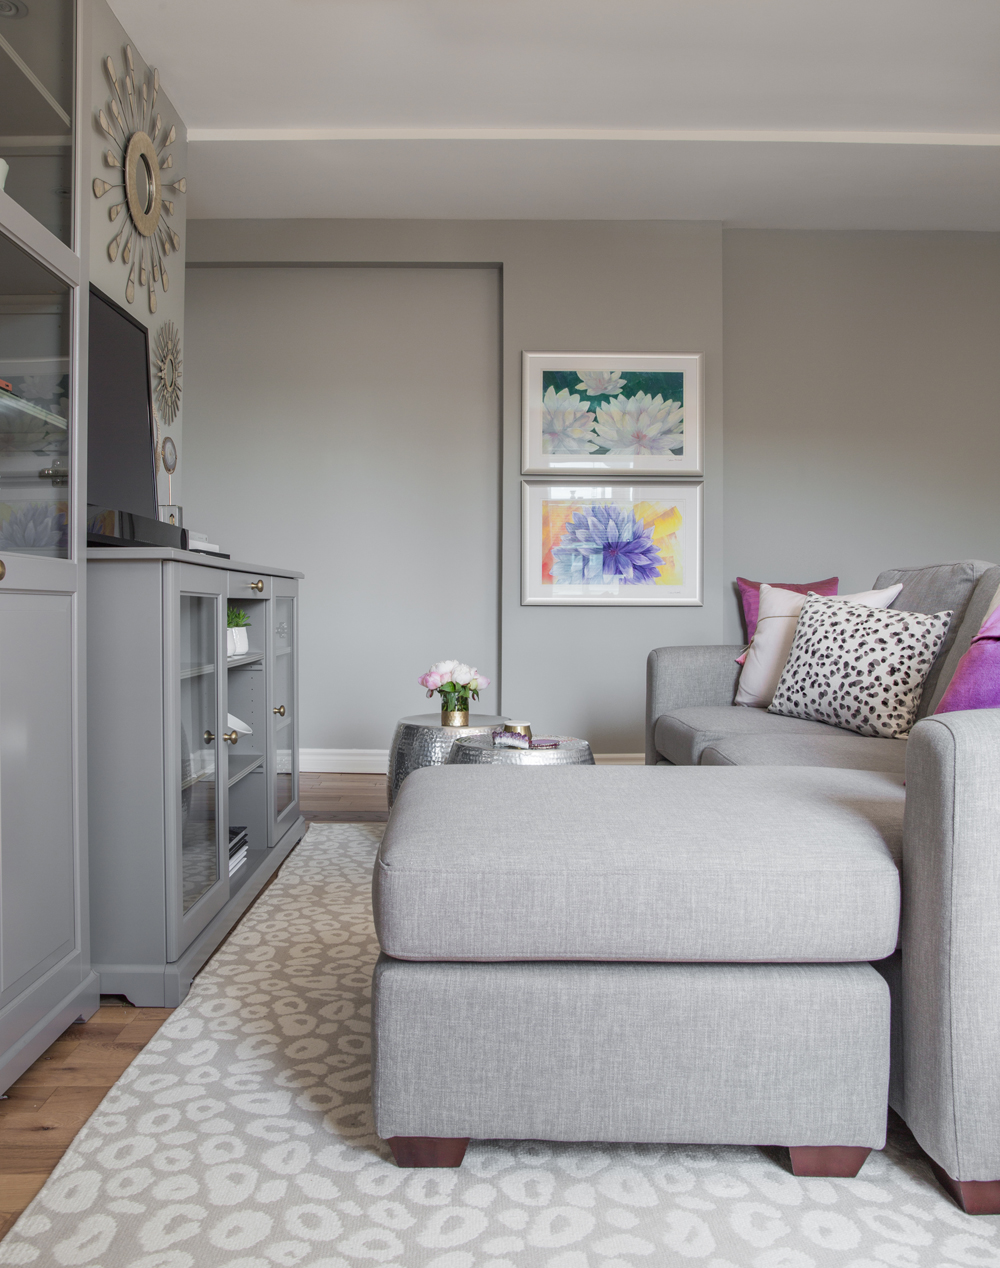 end of grey sectional facing grey cabinets, TV, two framed floral drawings